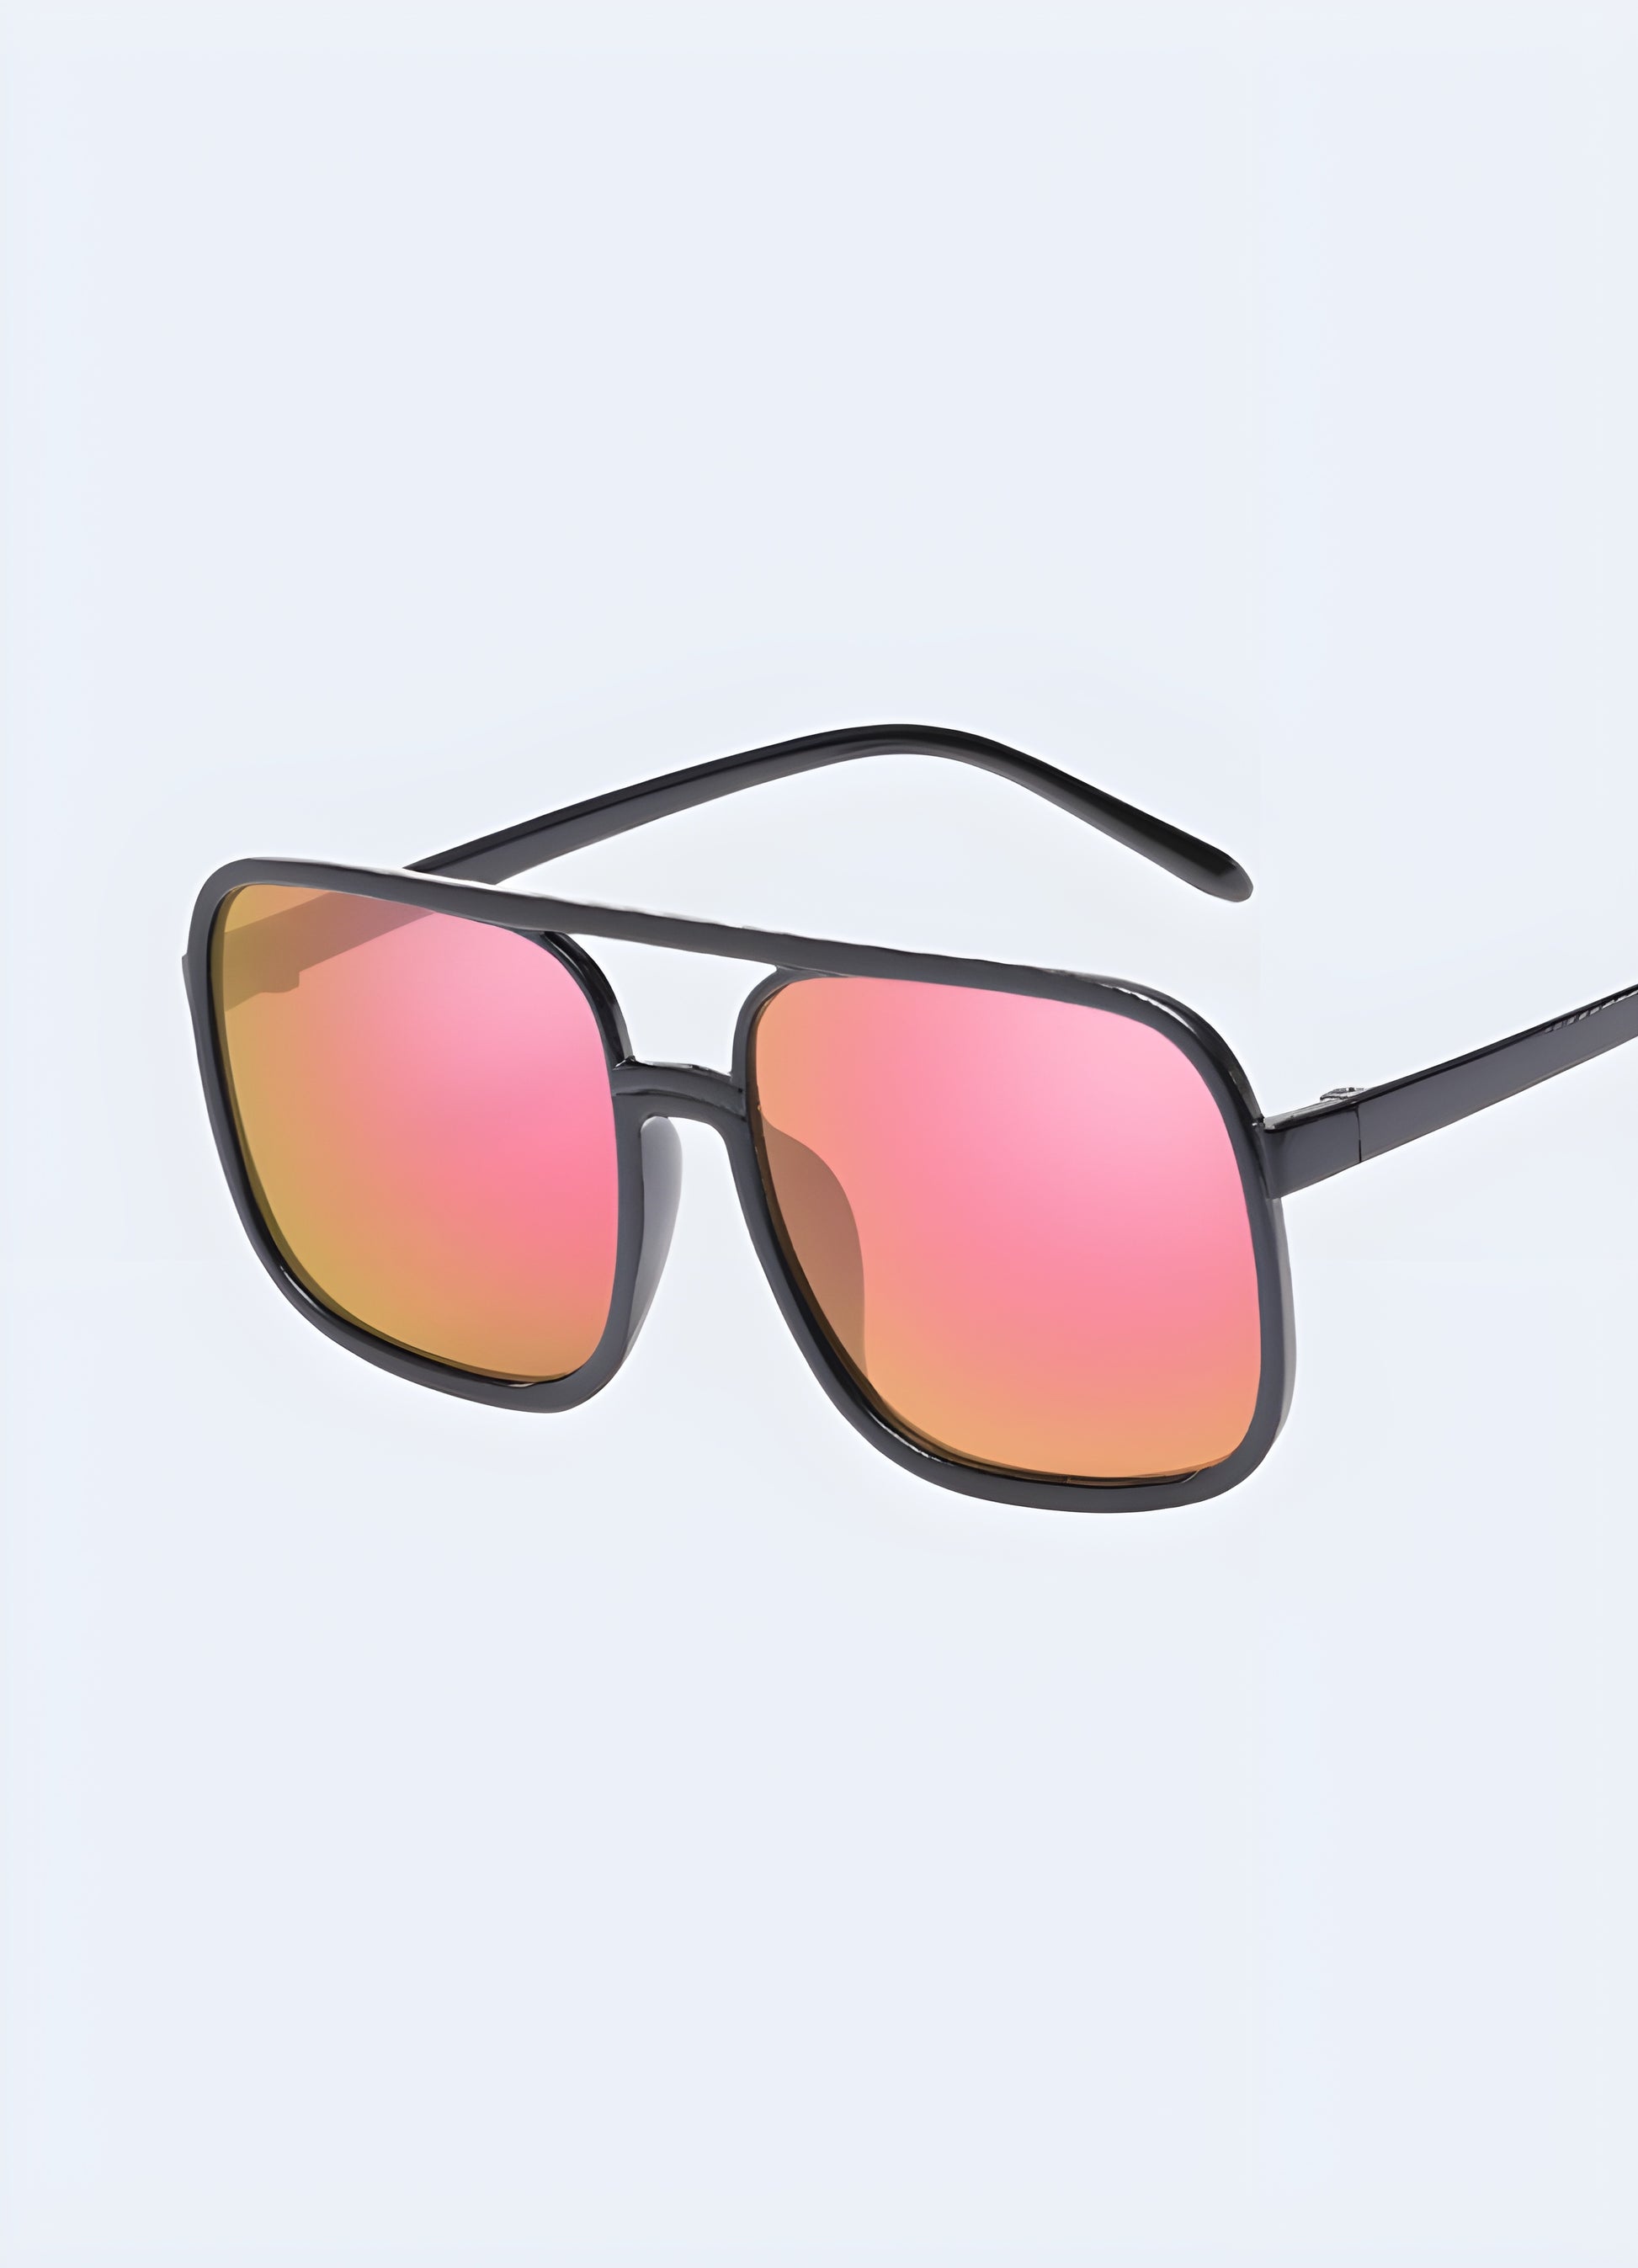 Futuristic design, red lenses, and lightweight frame elevate your style game.